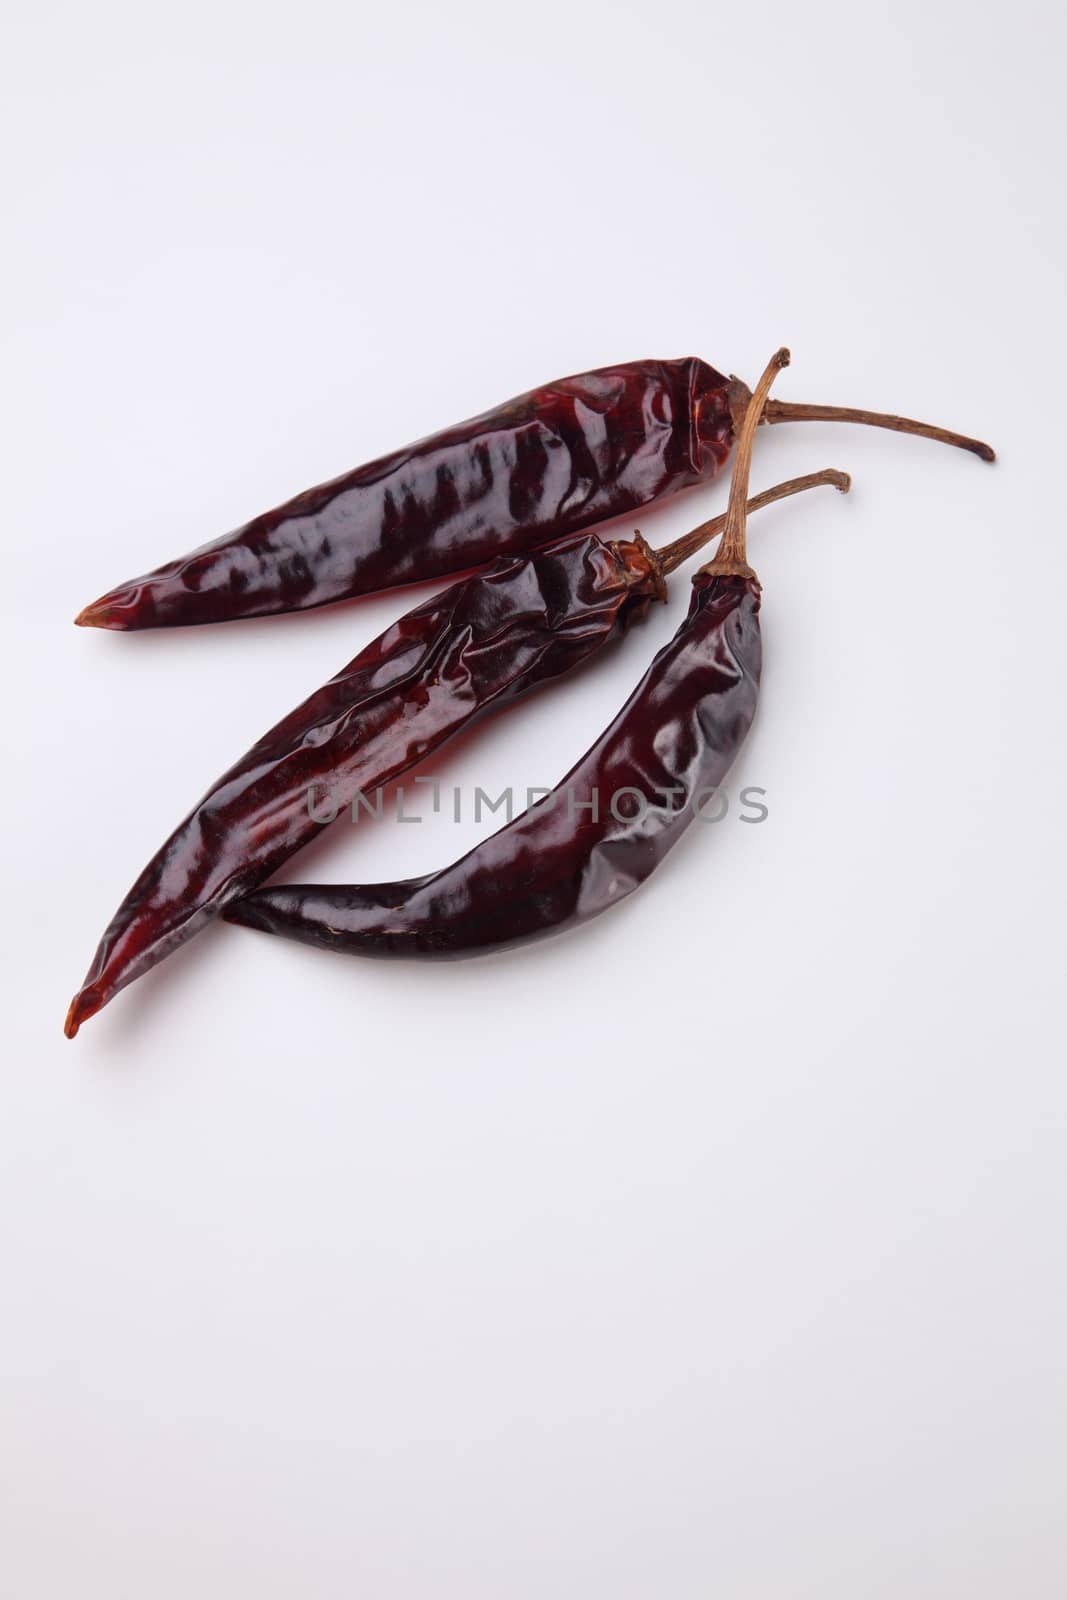 dried chili on the white background